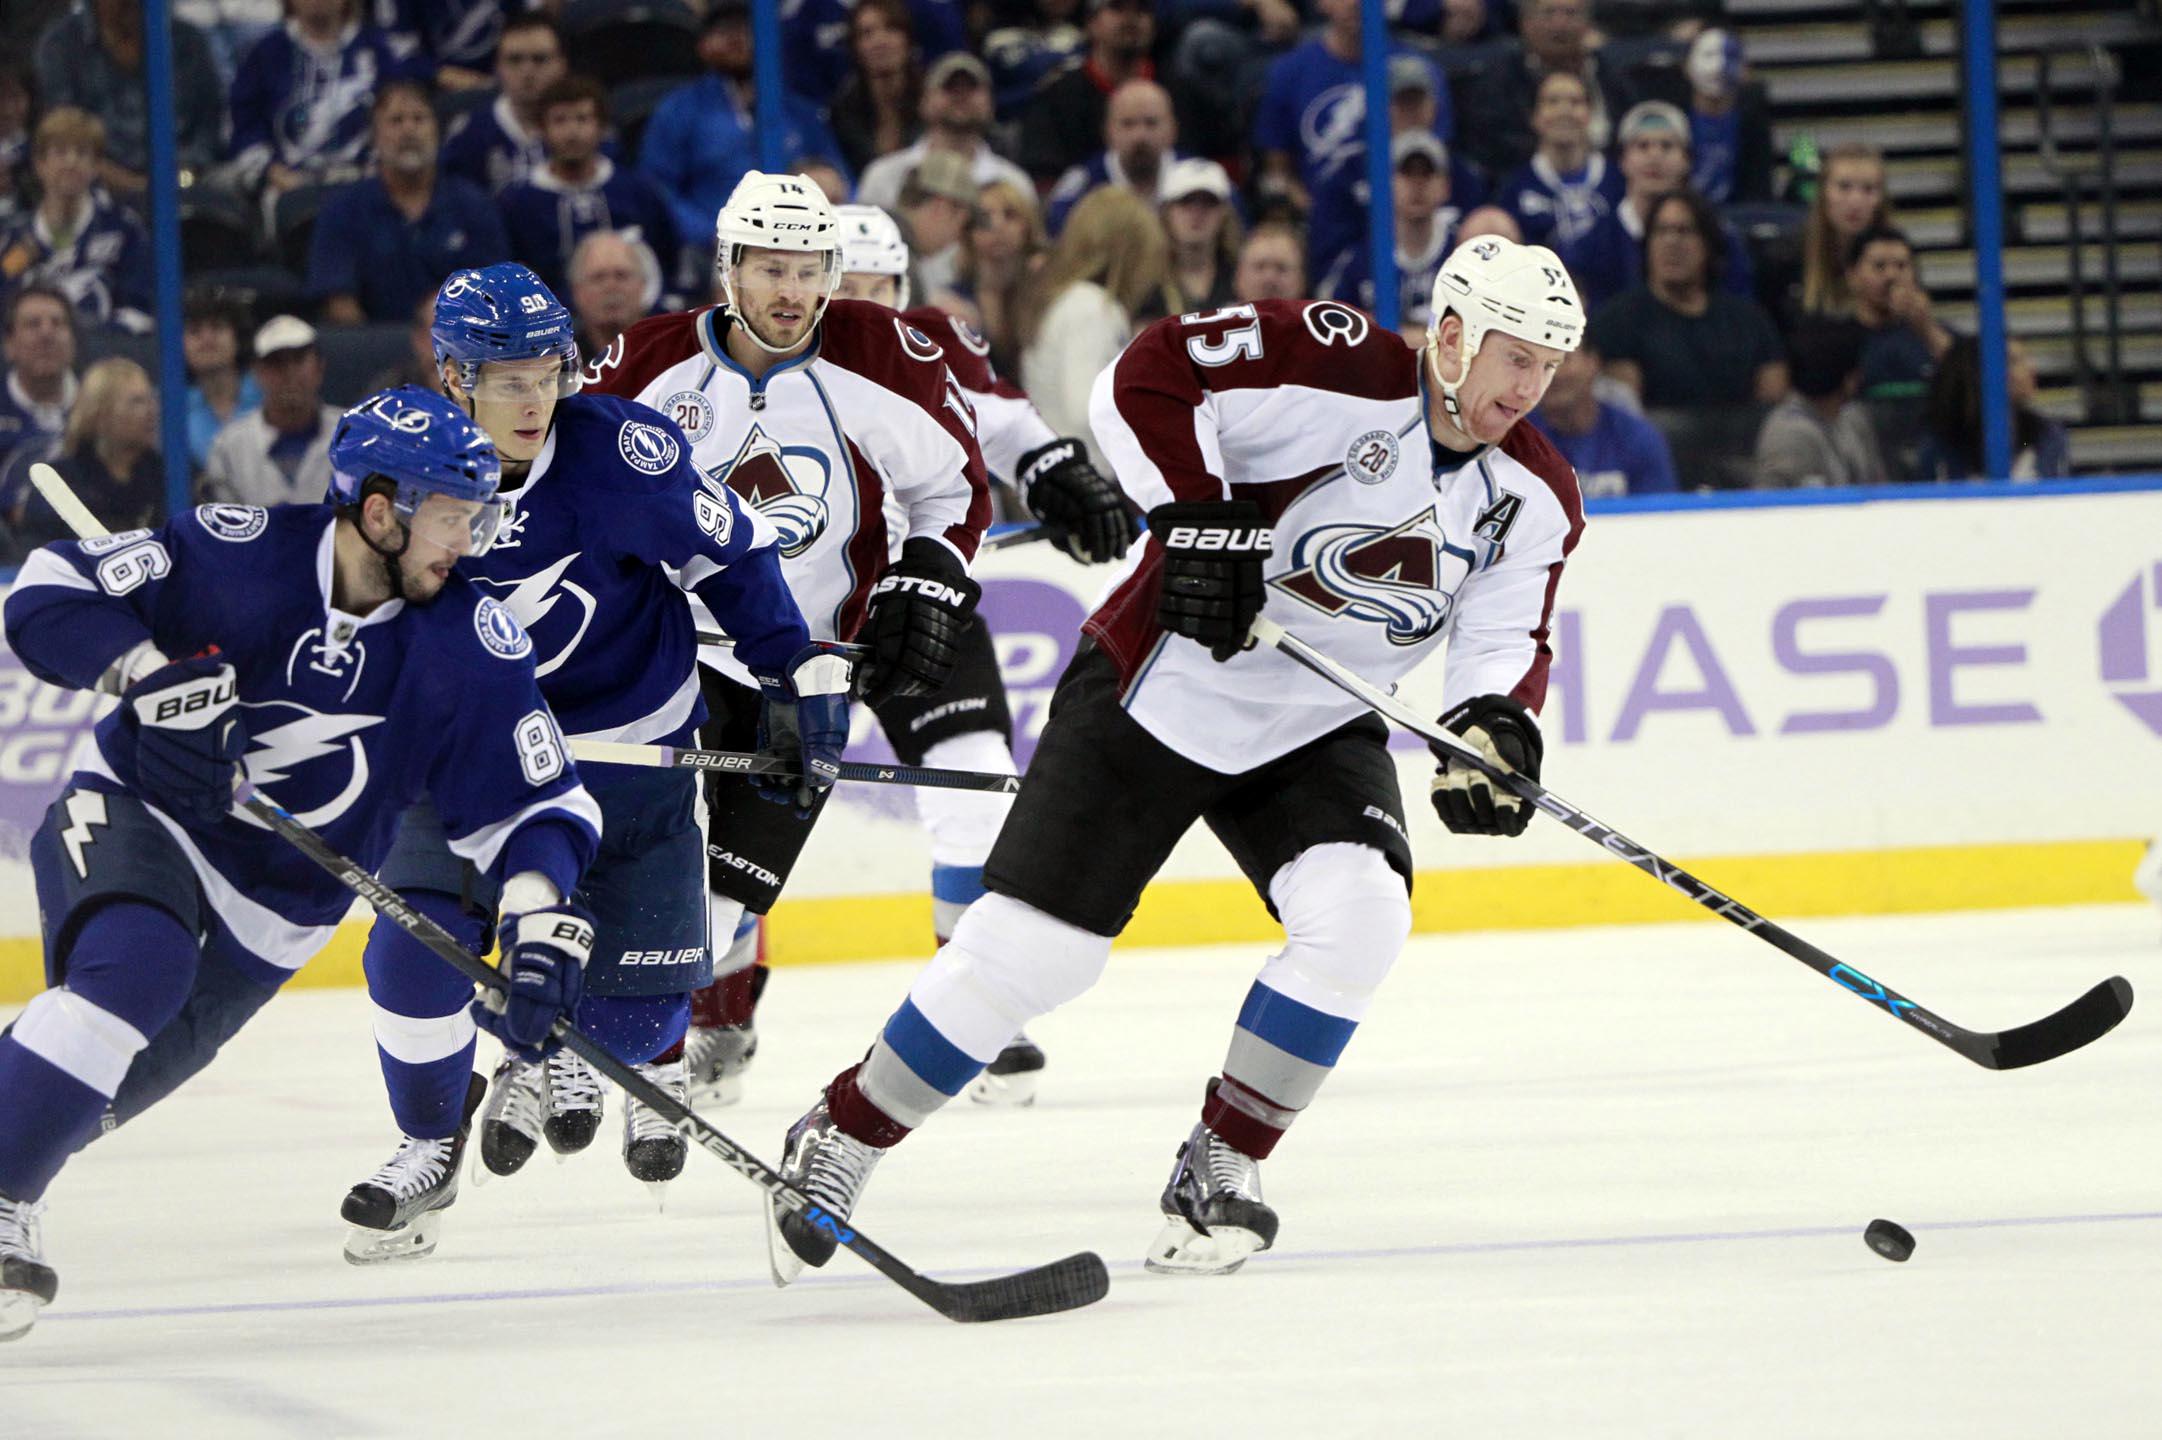 Avalanche vs Lightning Predictions, Odds & Schedule for Stanley Cup Finals on FanDuel Sportsbook